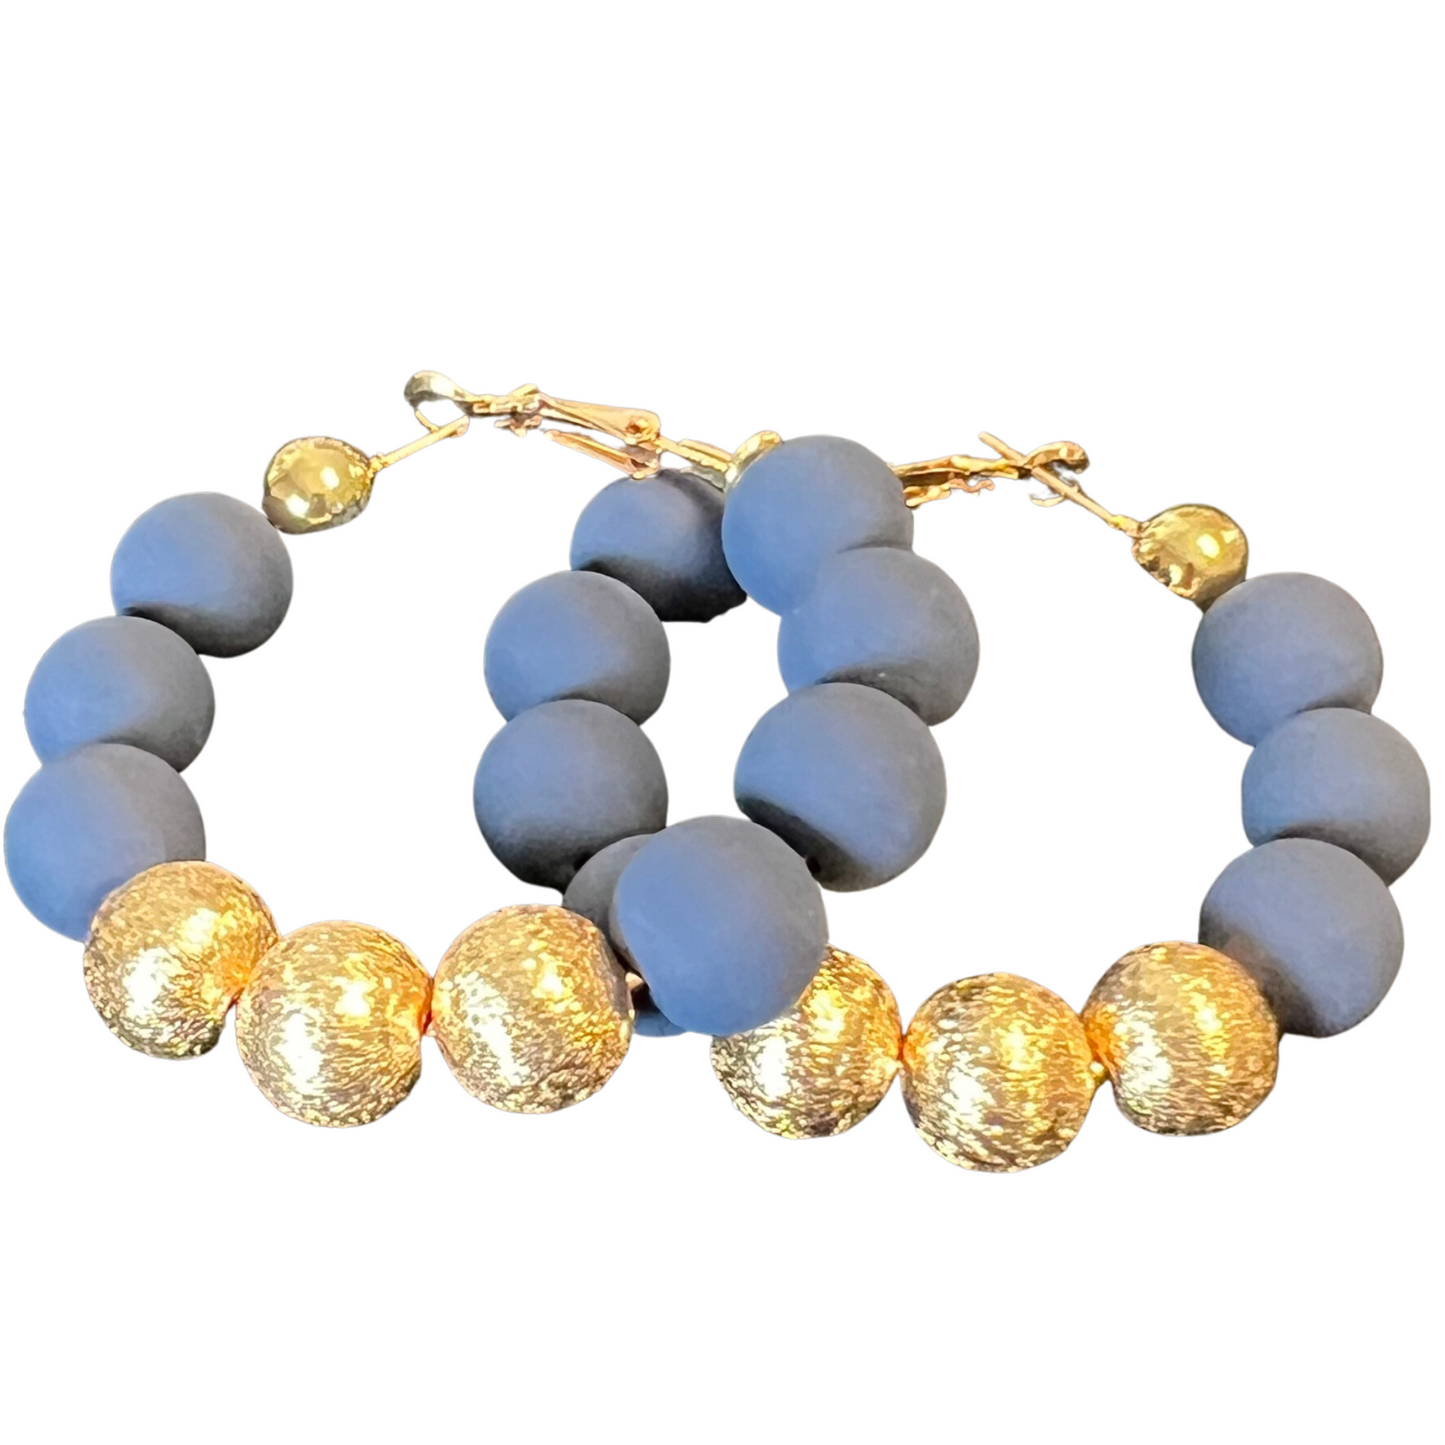 Large beaded hoop earrings in navy with gold accents